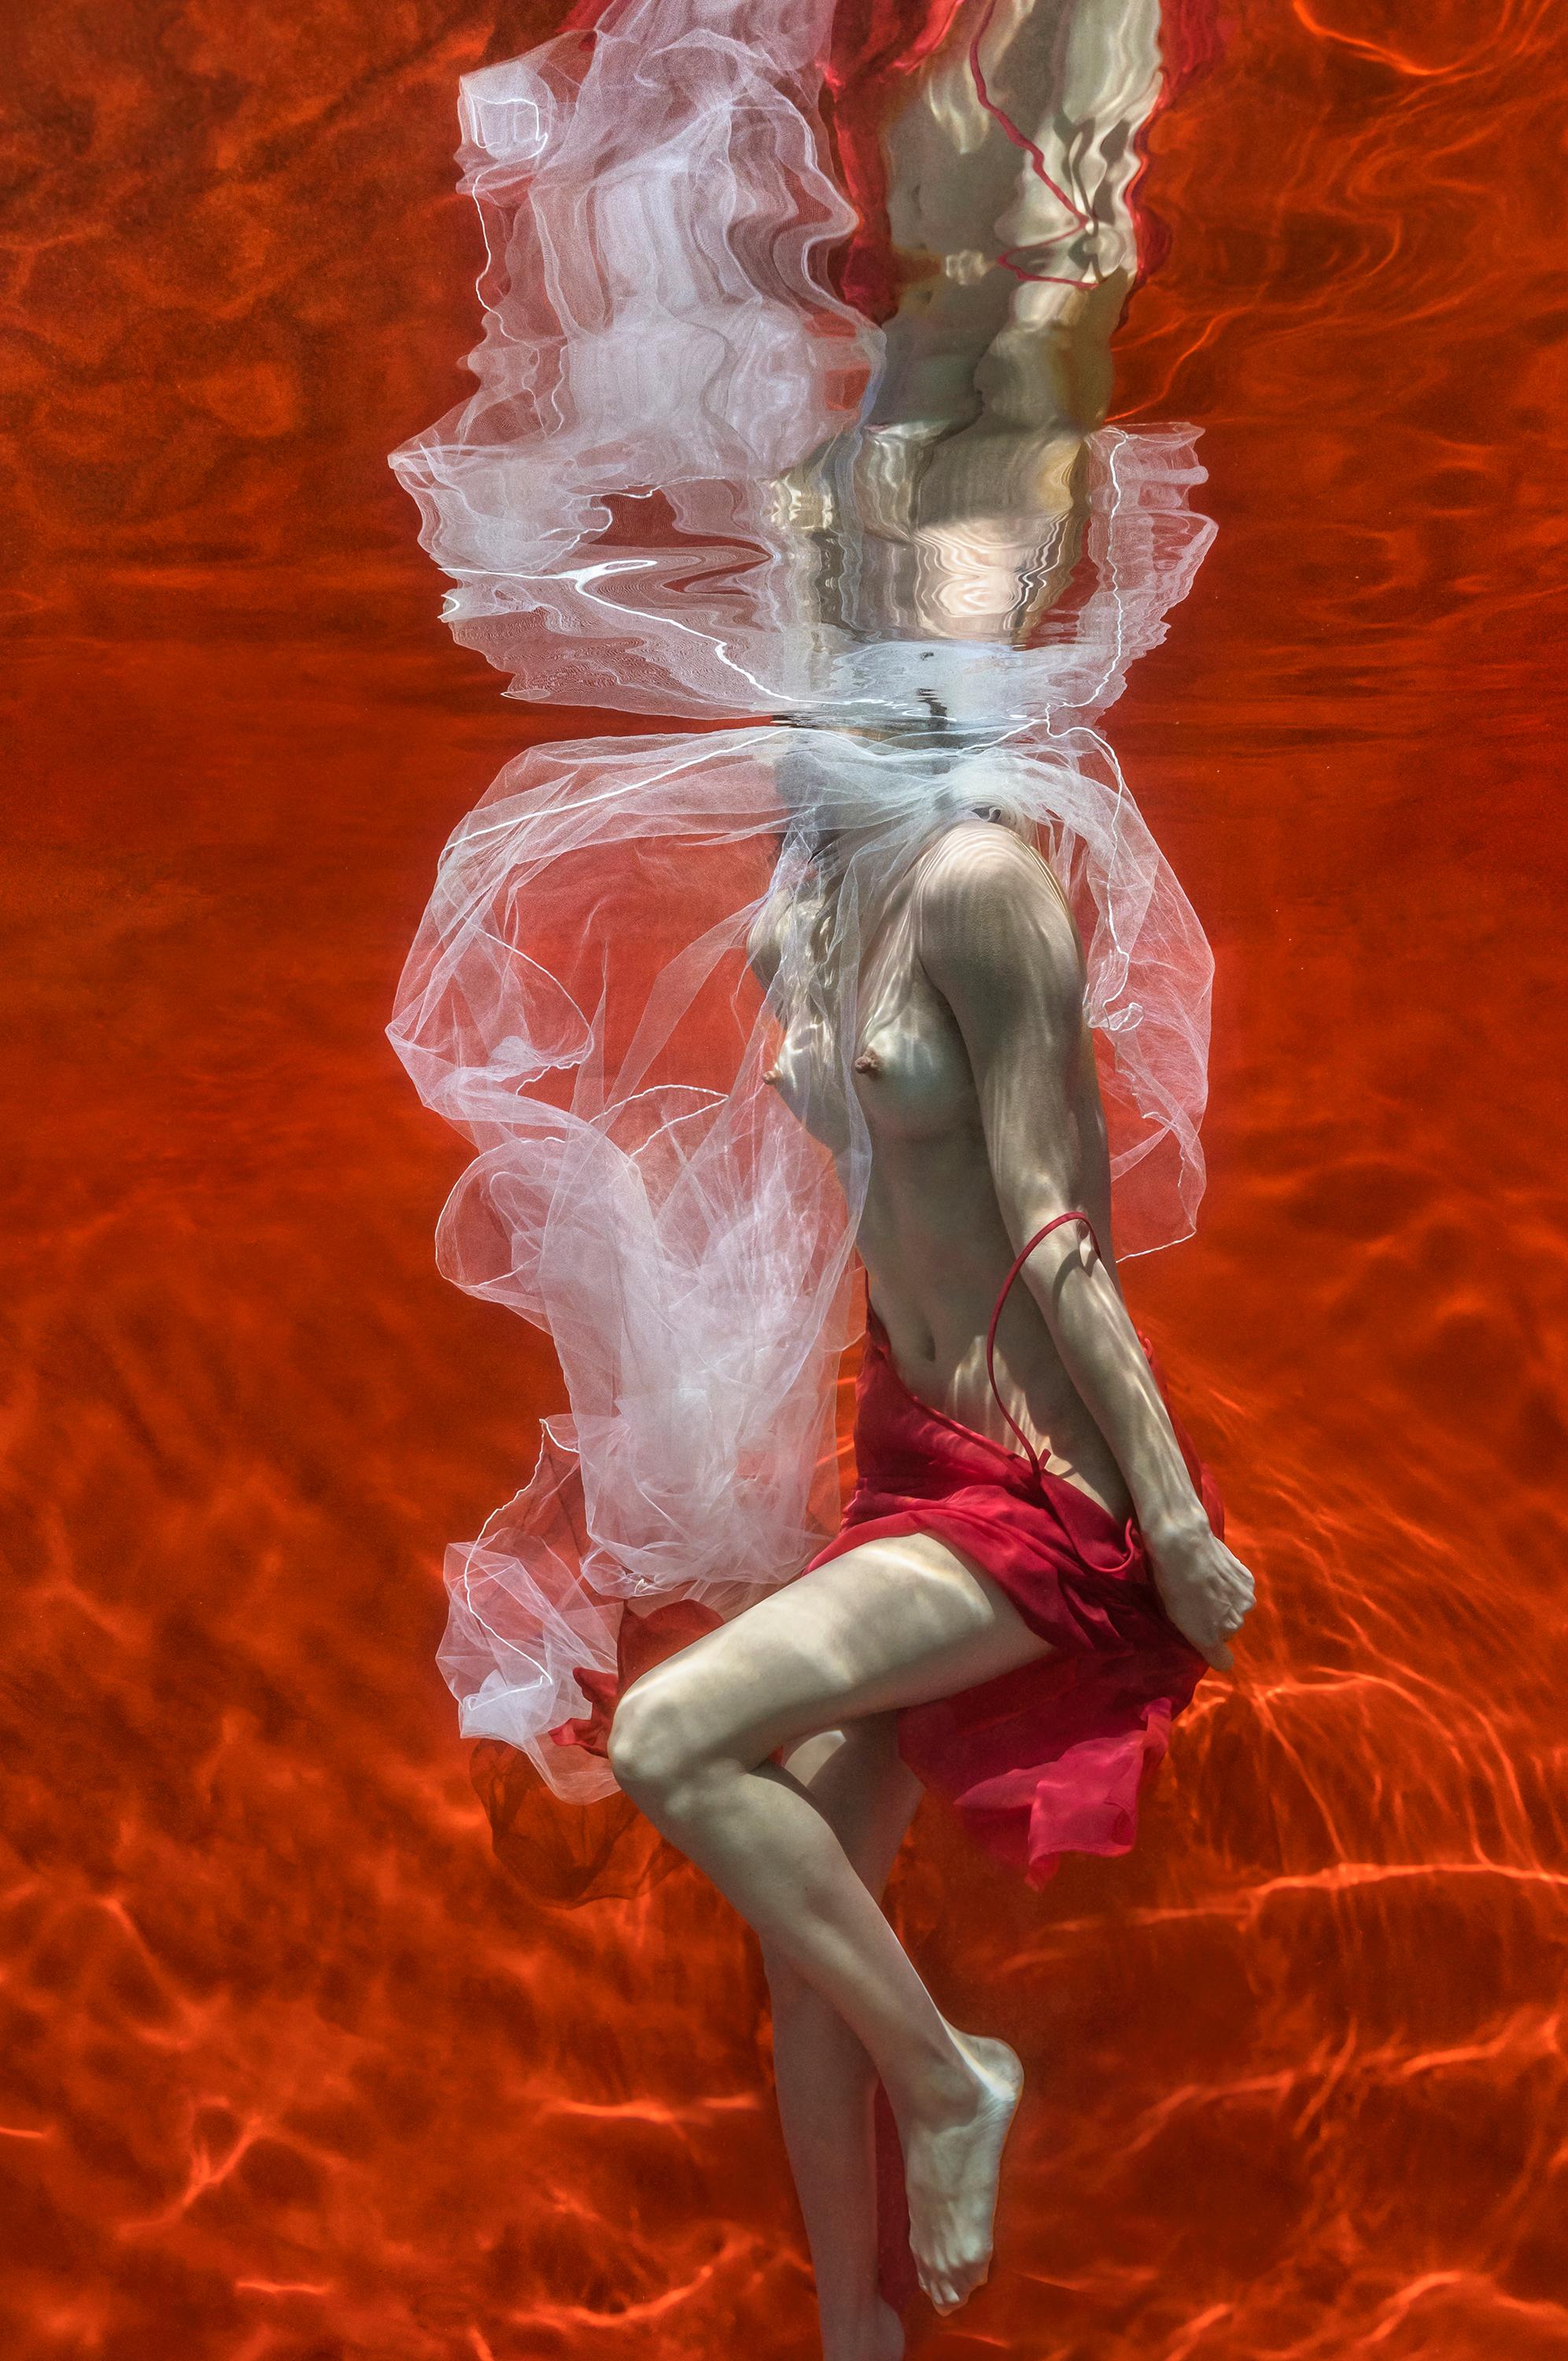 Blood and Milk III - underwater nude photograph - print on paper 60x43